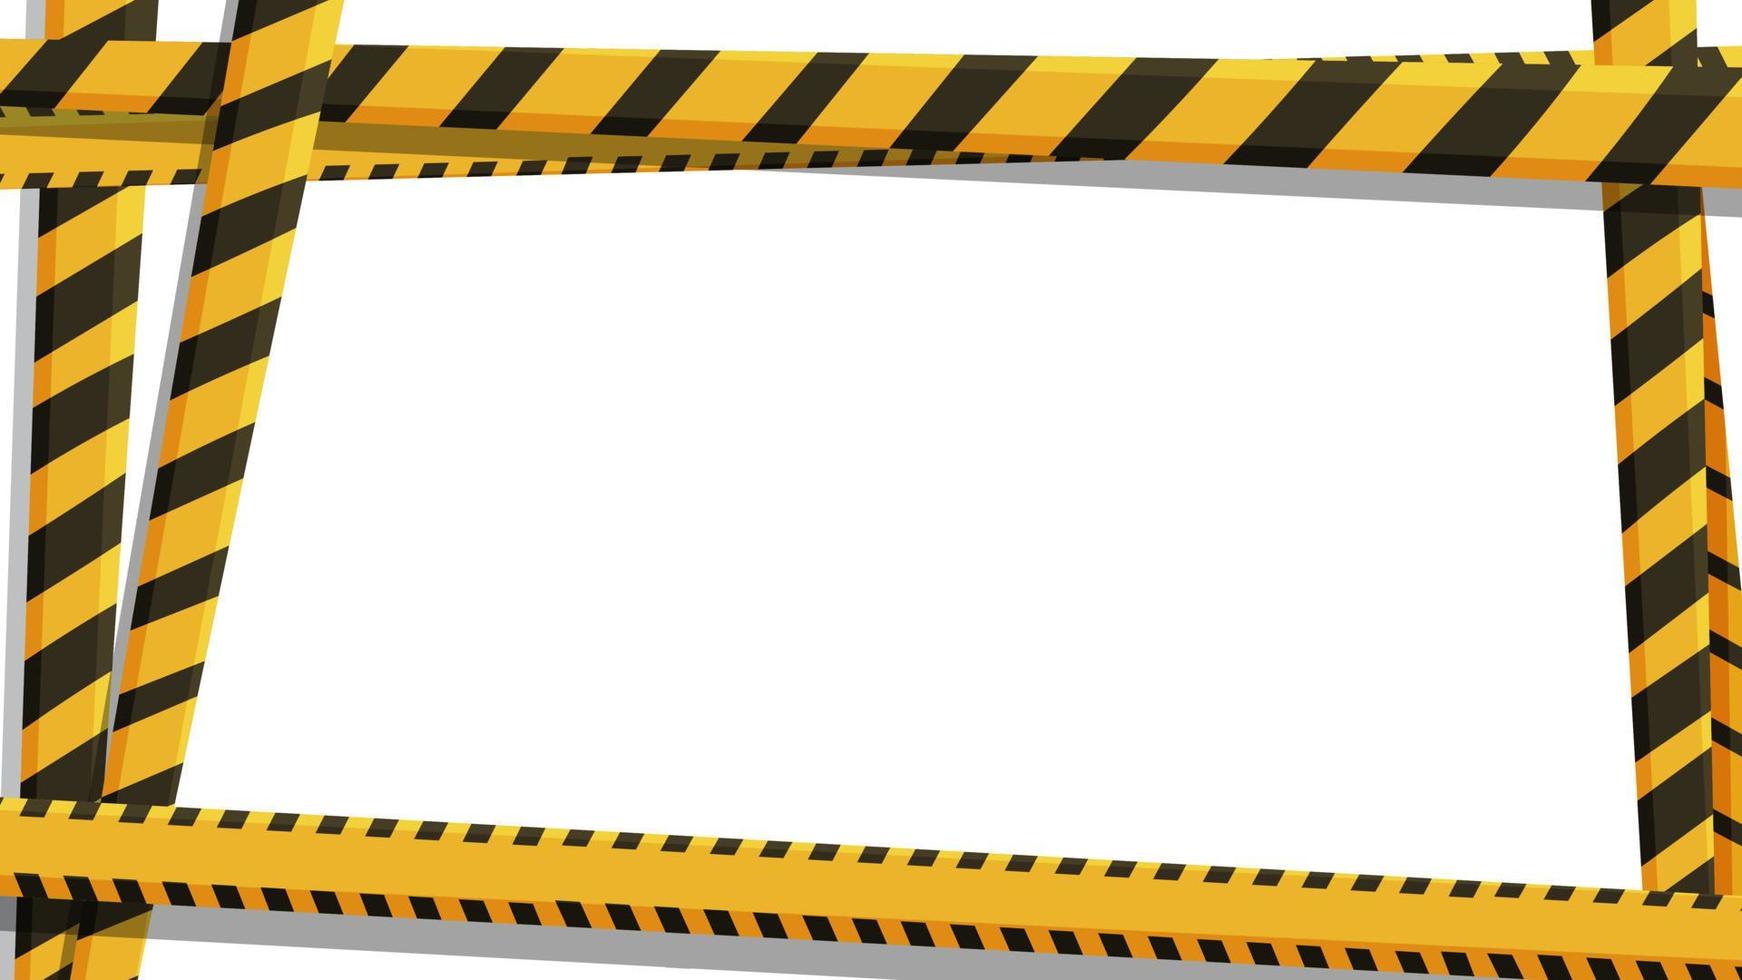 Vector illustration of a black and yellow warning frame.